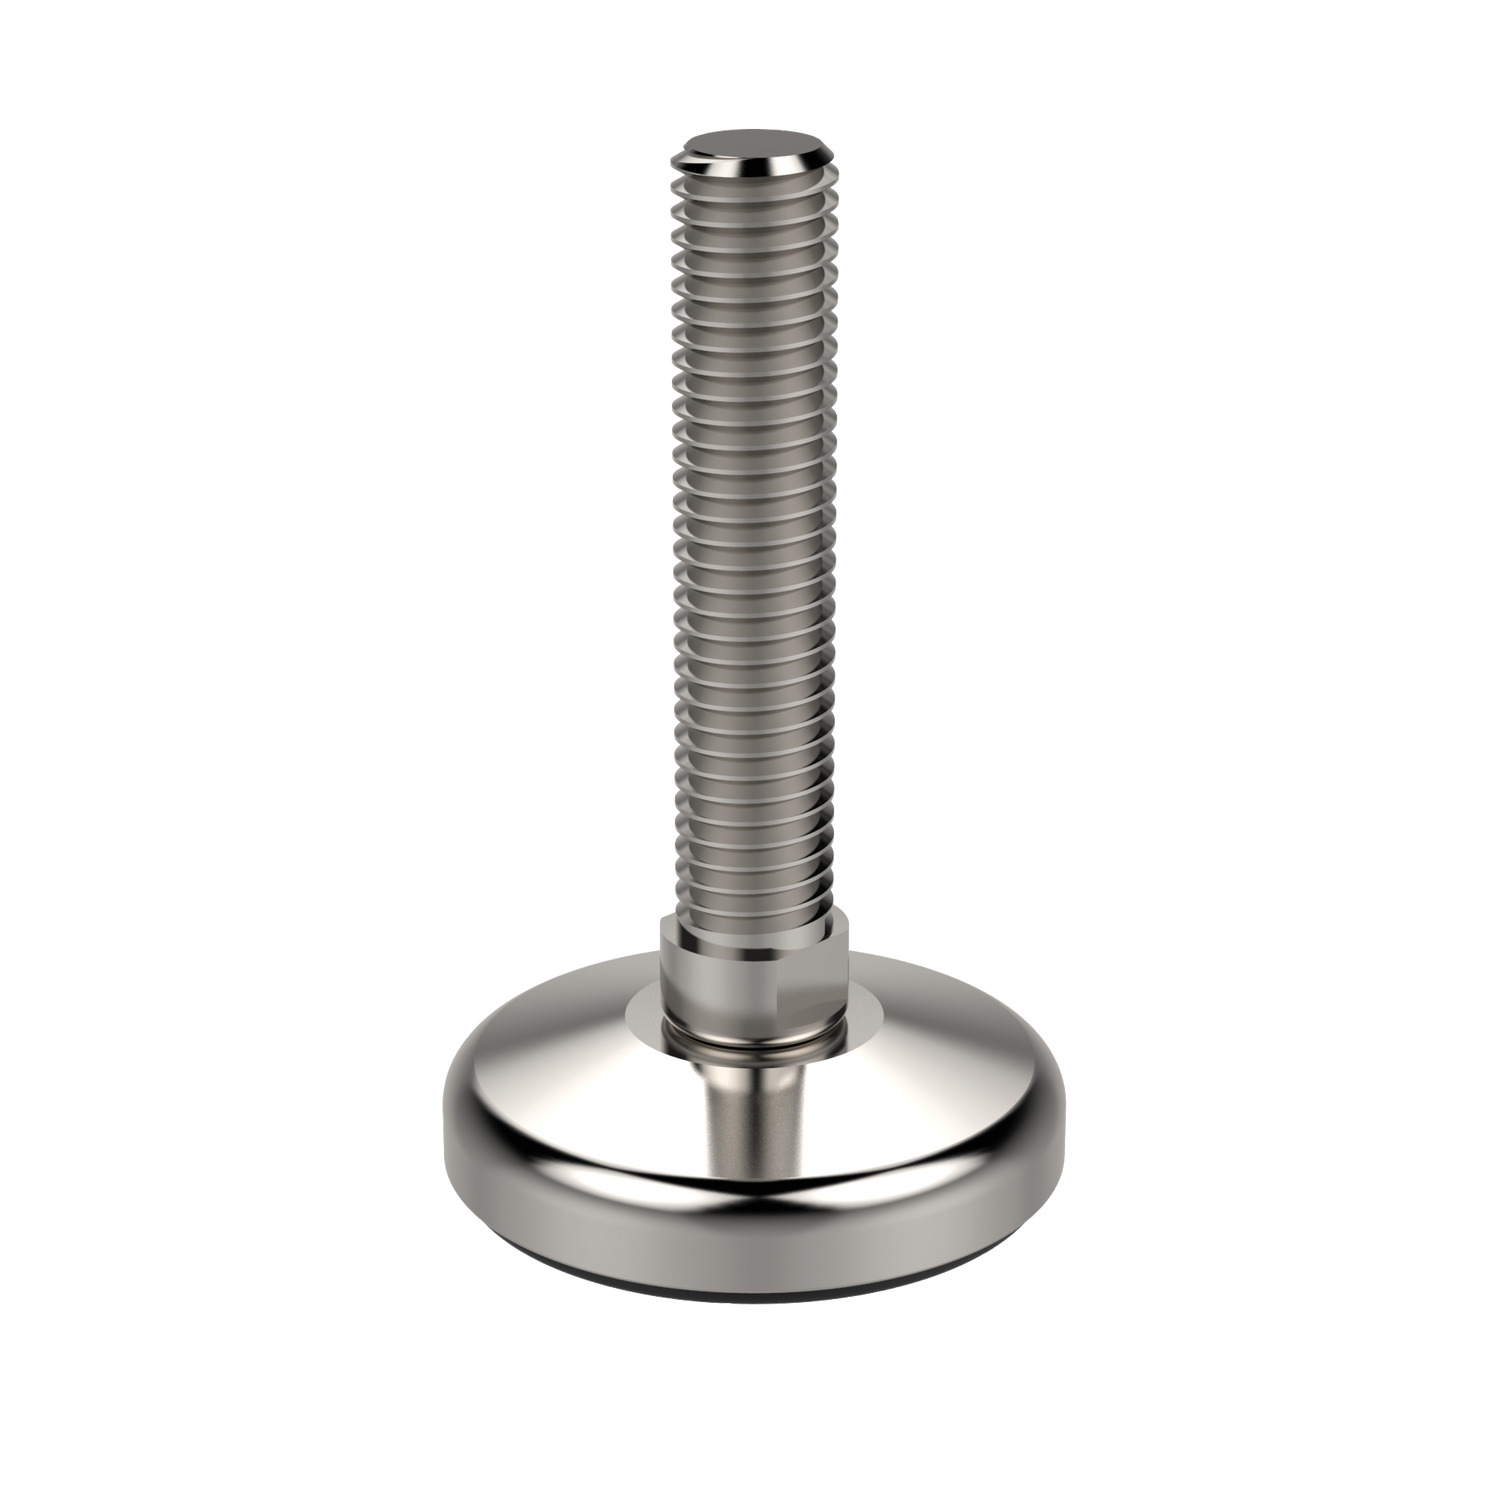 Product 34650, Levelling Feet - Fixed Feet stainless steel, heavy duty / 